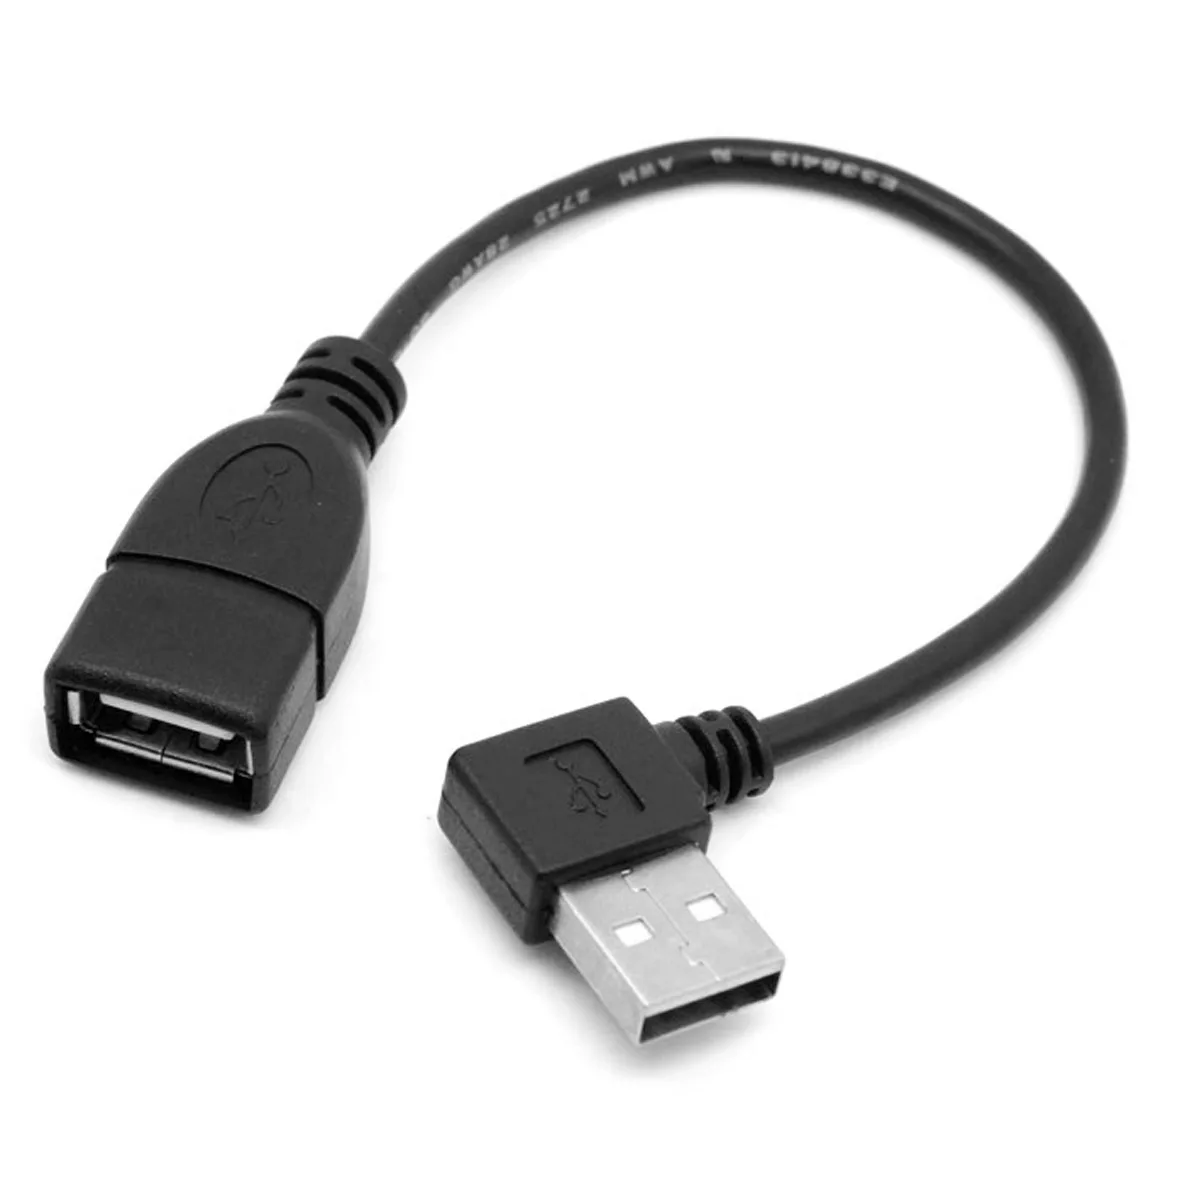 

Chenyang USB Cable USB Adapter USB Adapter Cable USB 2.0 A type Cable Male to Female Right Angled USB Cable 0.1m 0.2m 0.4m